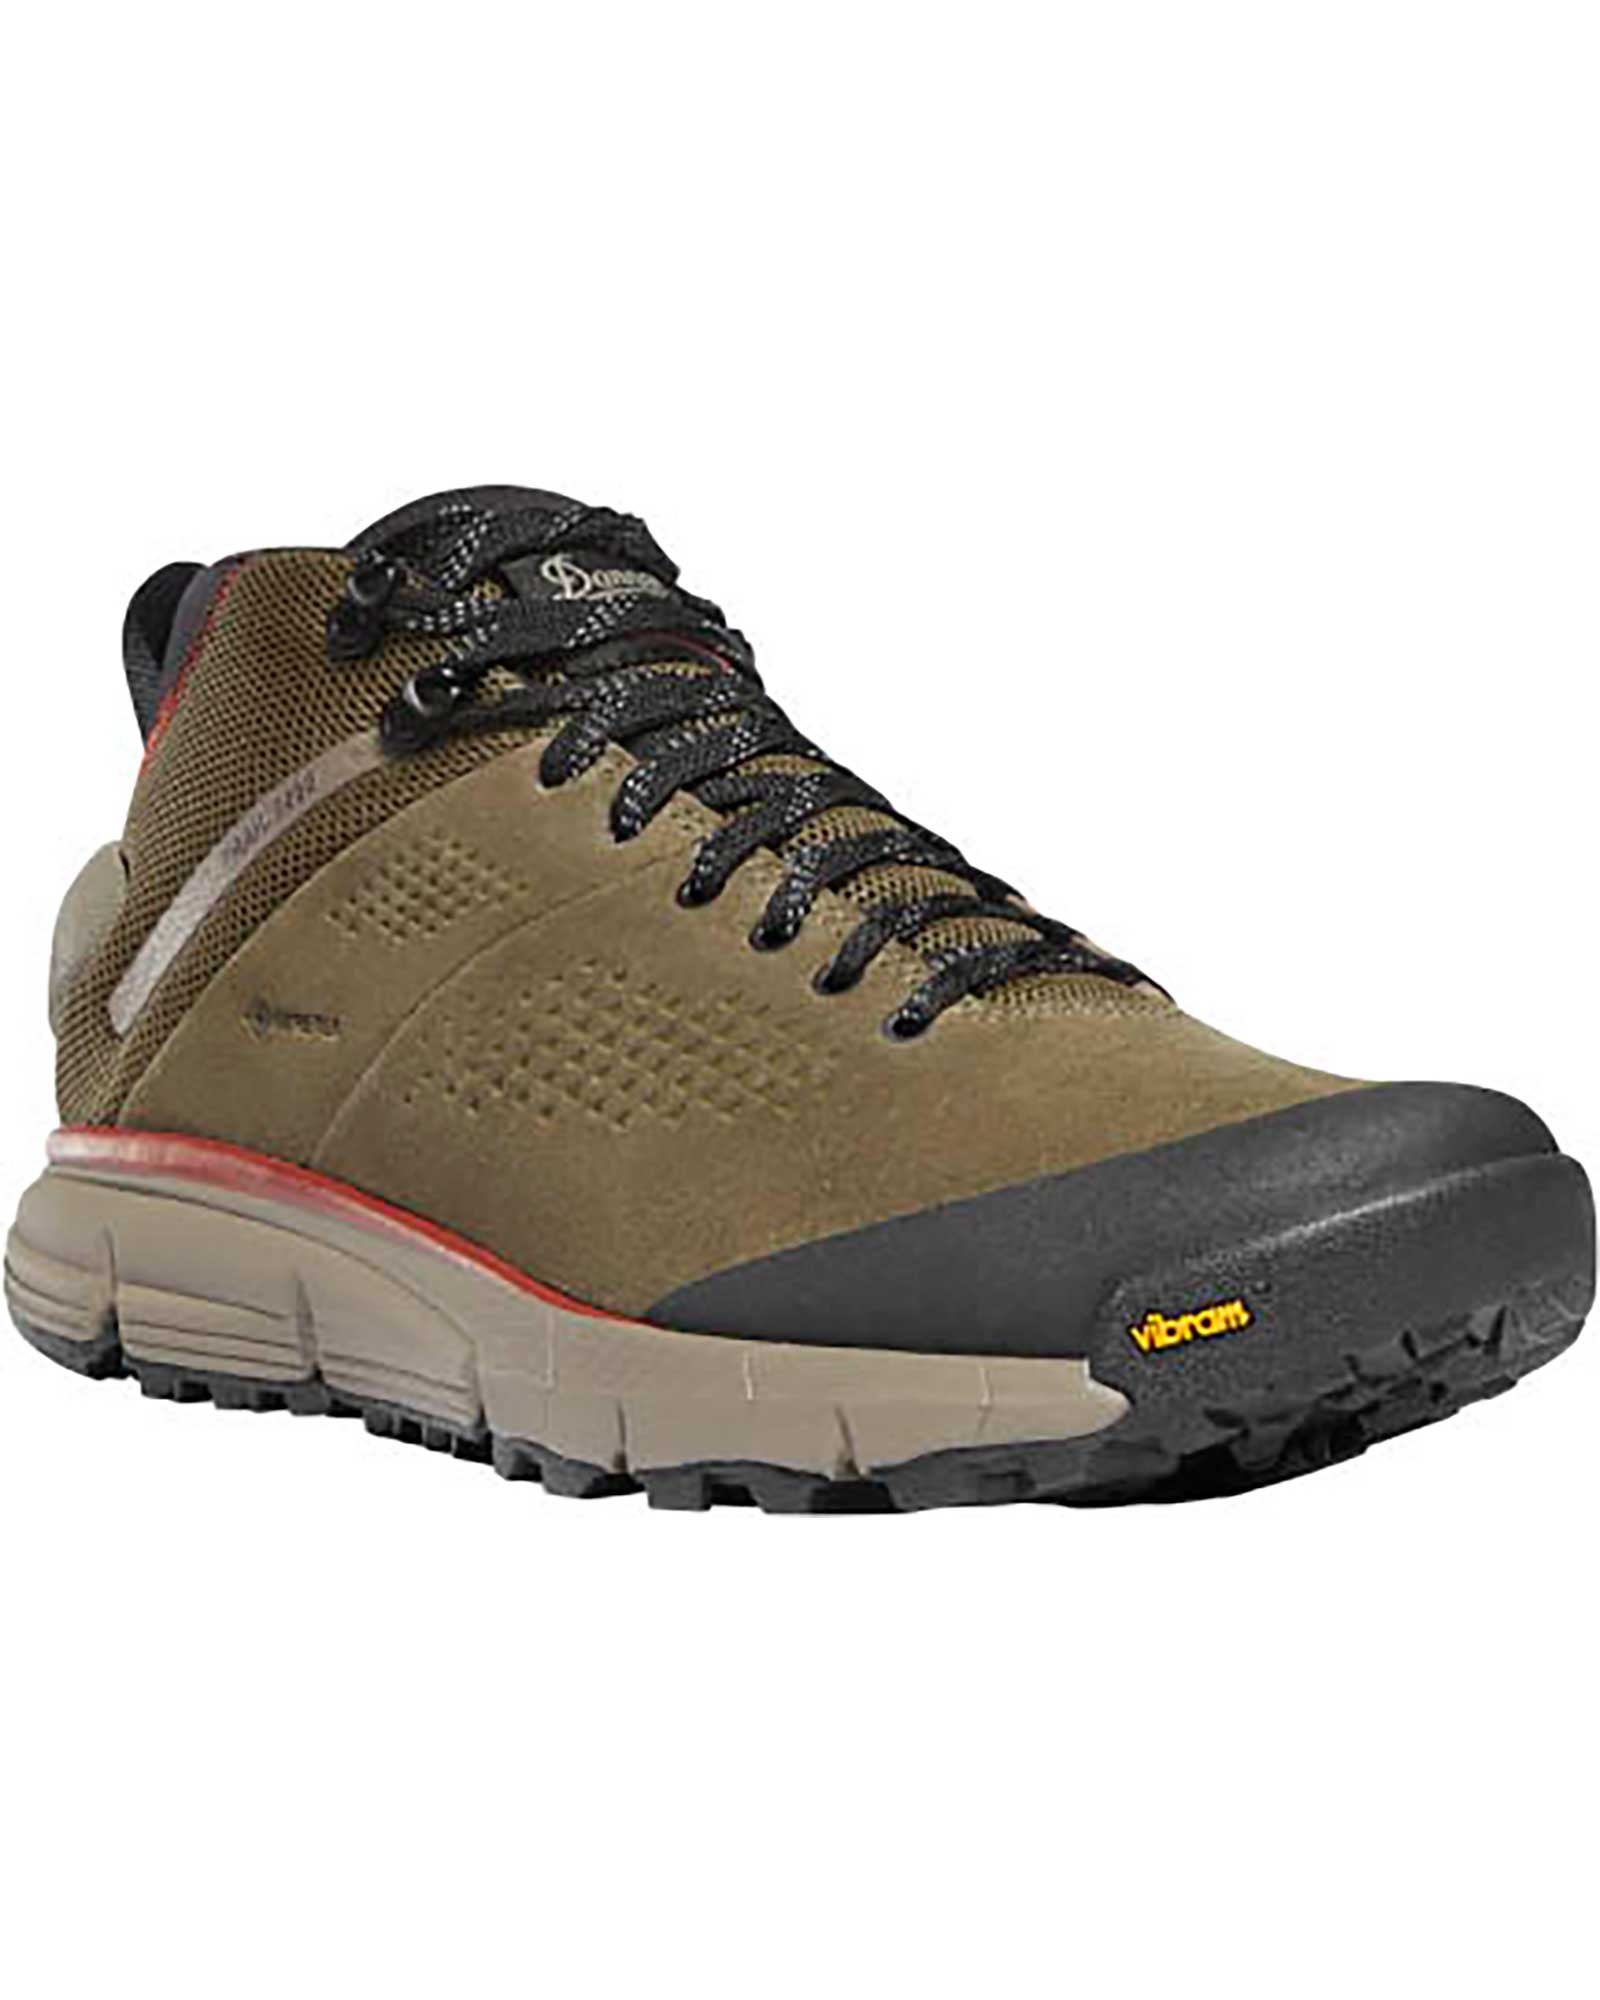 Danner Men’s Trail 2650 Mid GORE TEX Boots - Dusty Olive UK 8.5